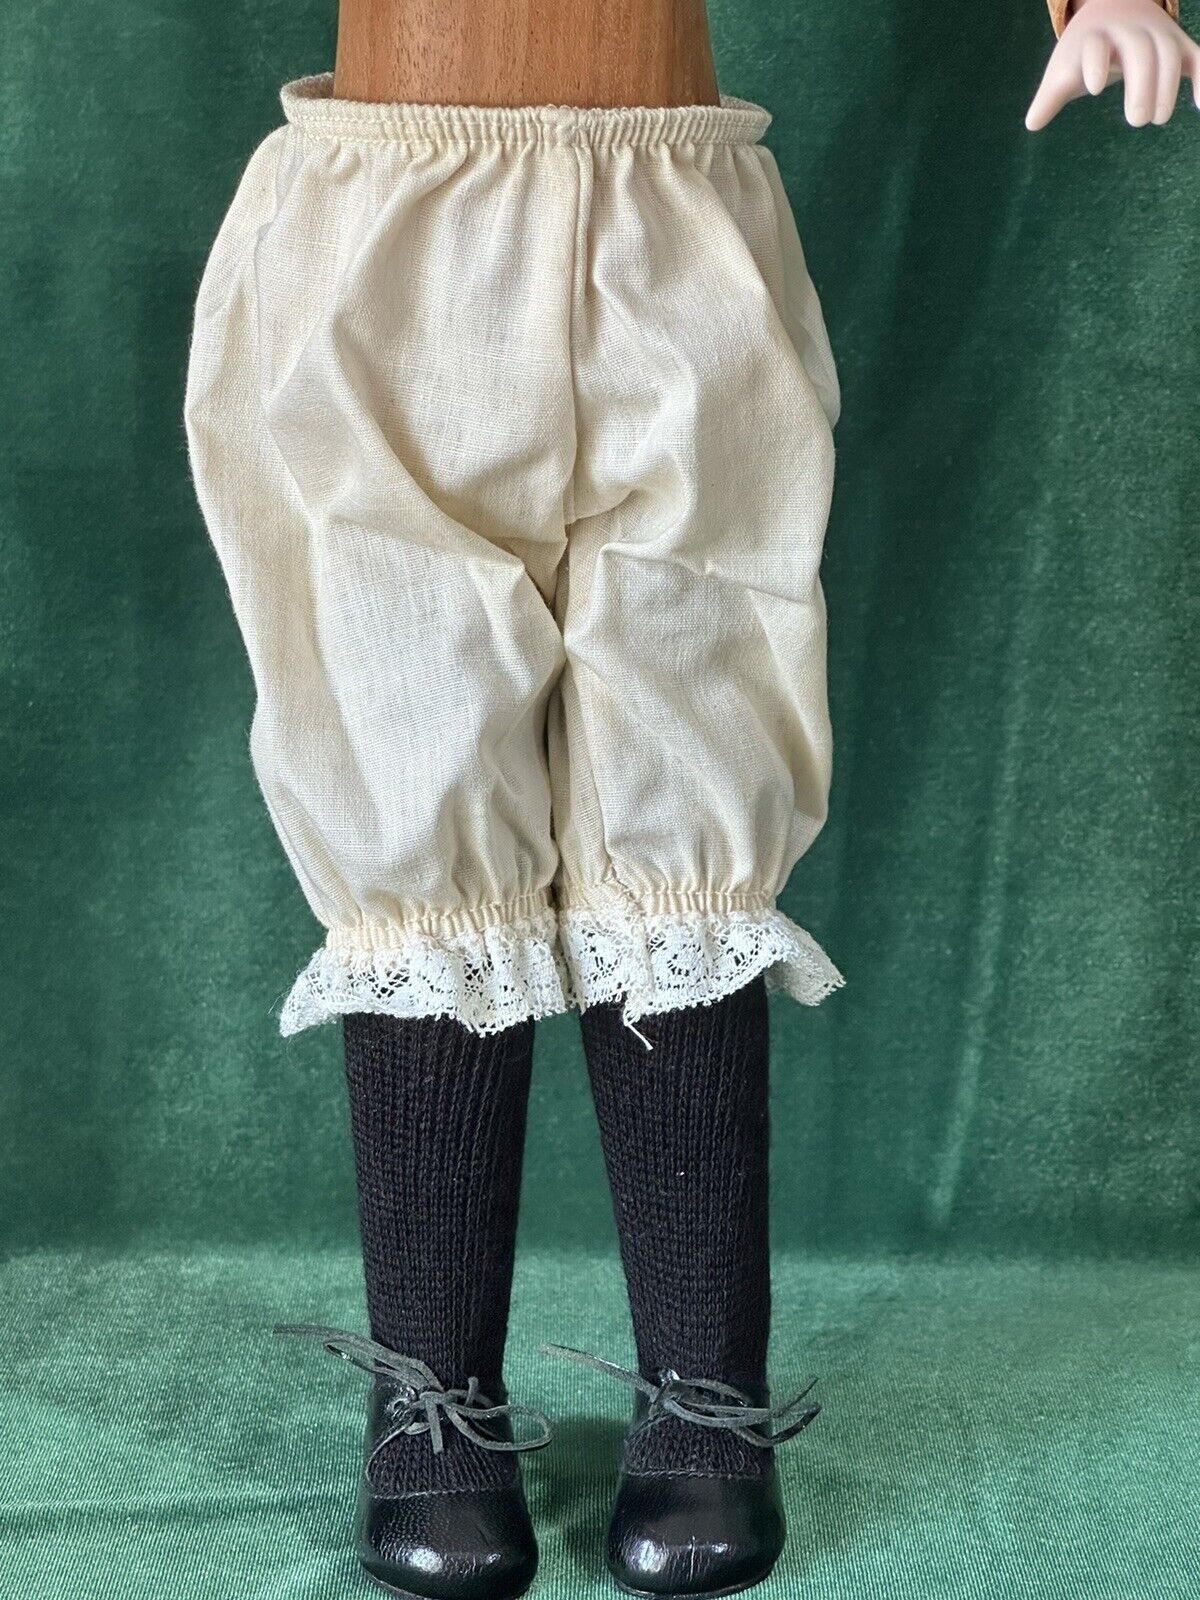 MIB Wendy Lawton “At Aunty’s House” Wooden Jointed/Porcelain 16” Doll LE 350